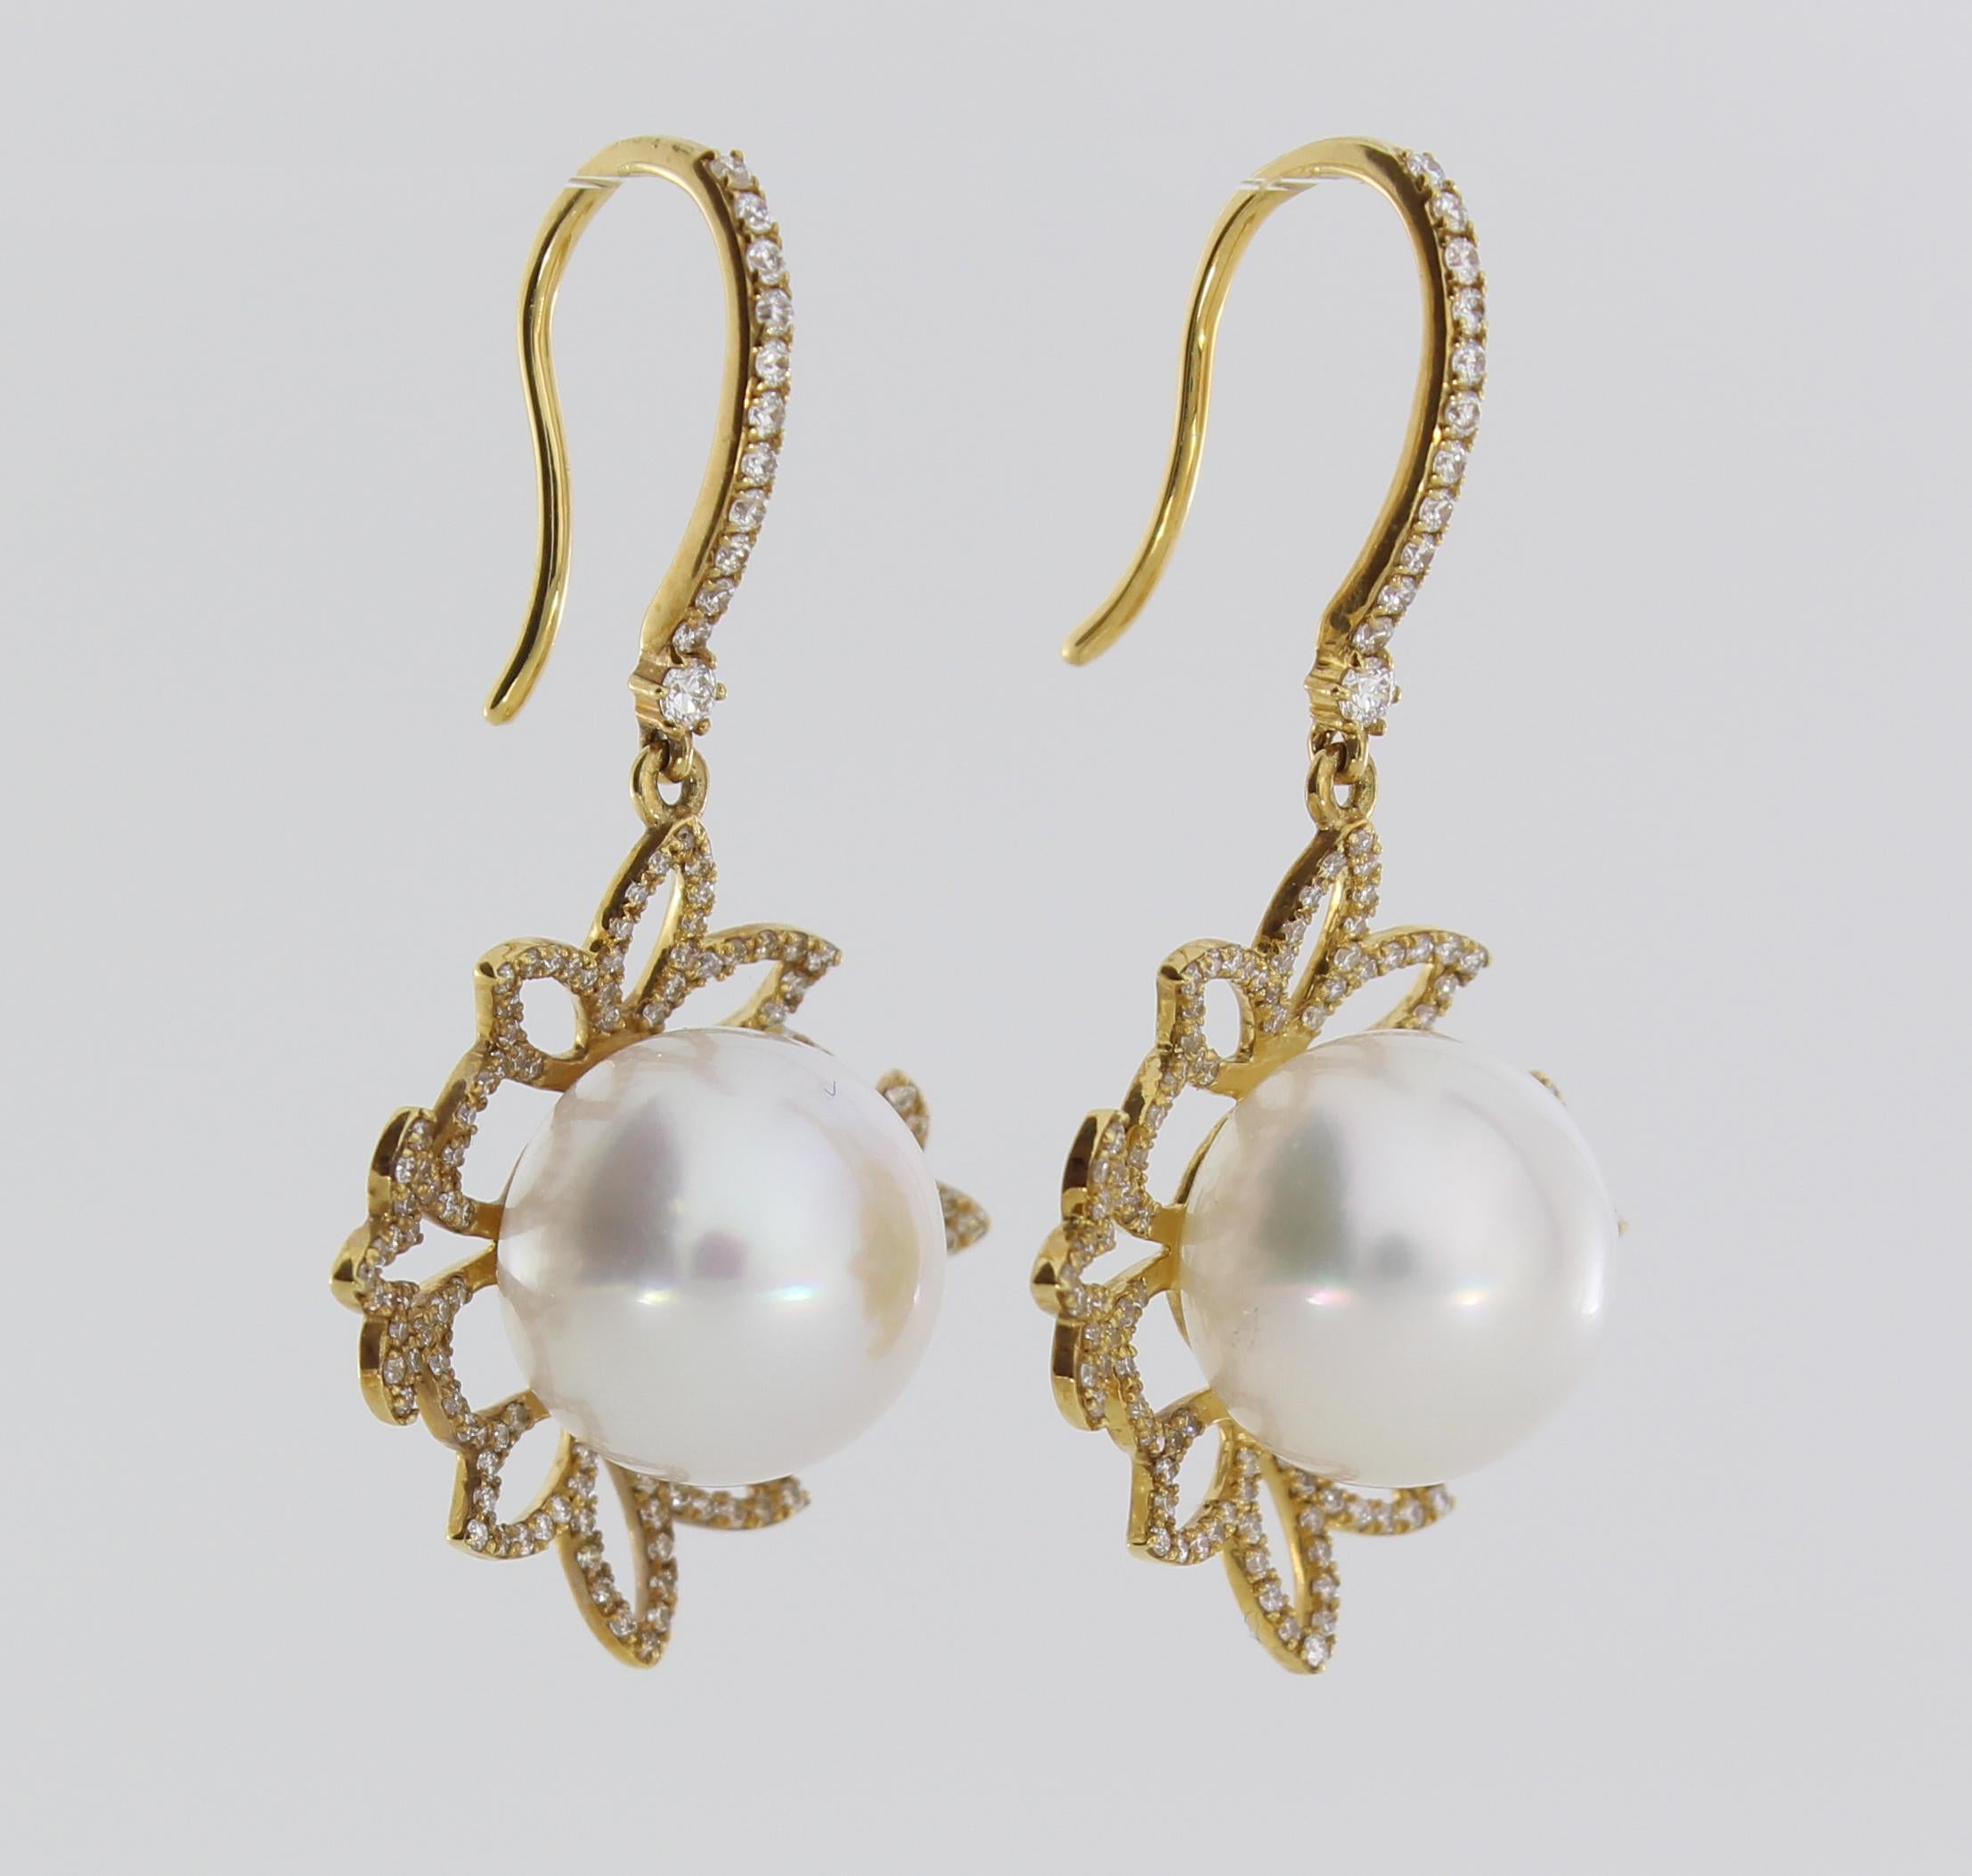 18k Yellow Gold with White Diamonds (0.815ct) with 11mm White High Button South Sea Pearls. 